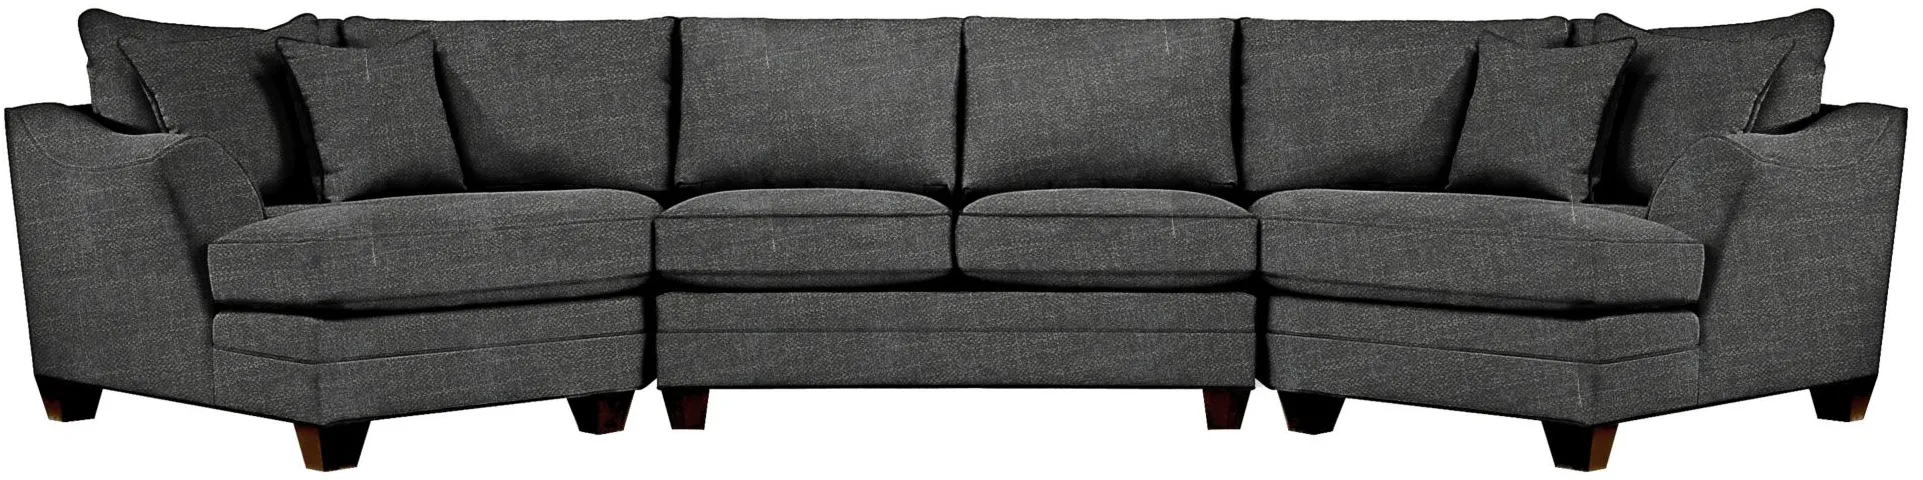 Foresthill 3-pc. Symmetrical Cuddler Sectional Sofa in Elliot Graphite by H.M. Richards